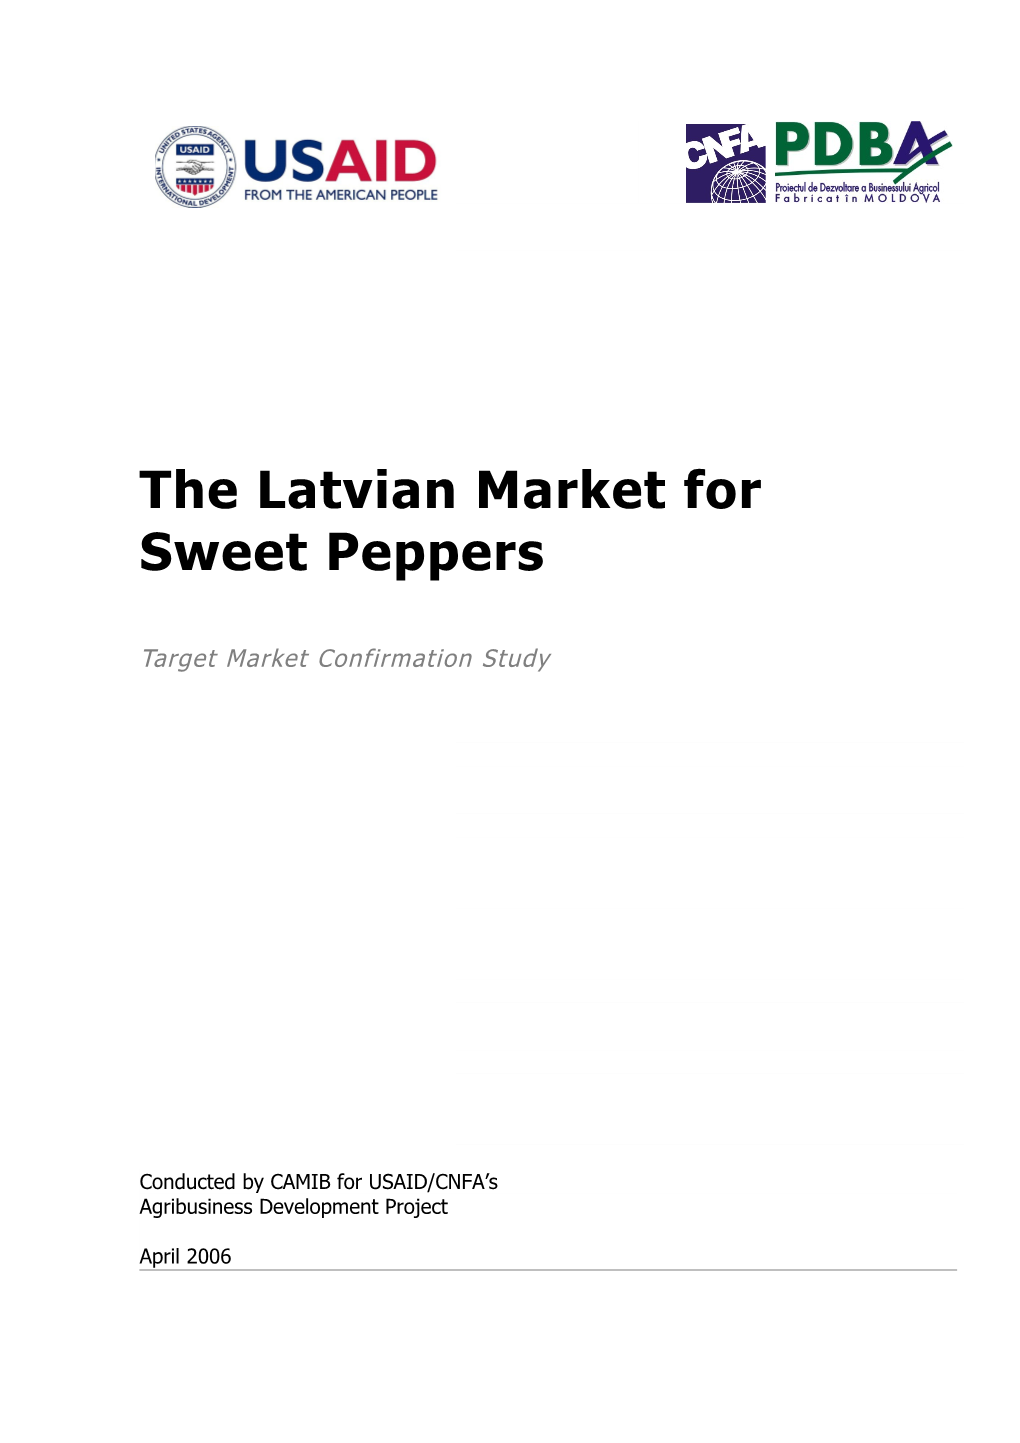 The Latvian Market for Sweet Peppers